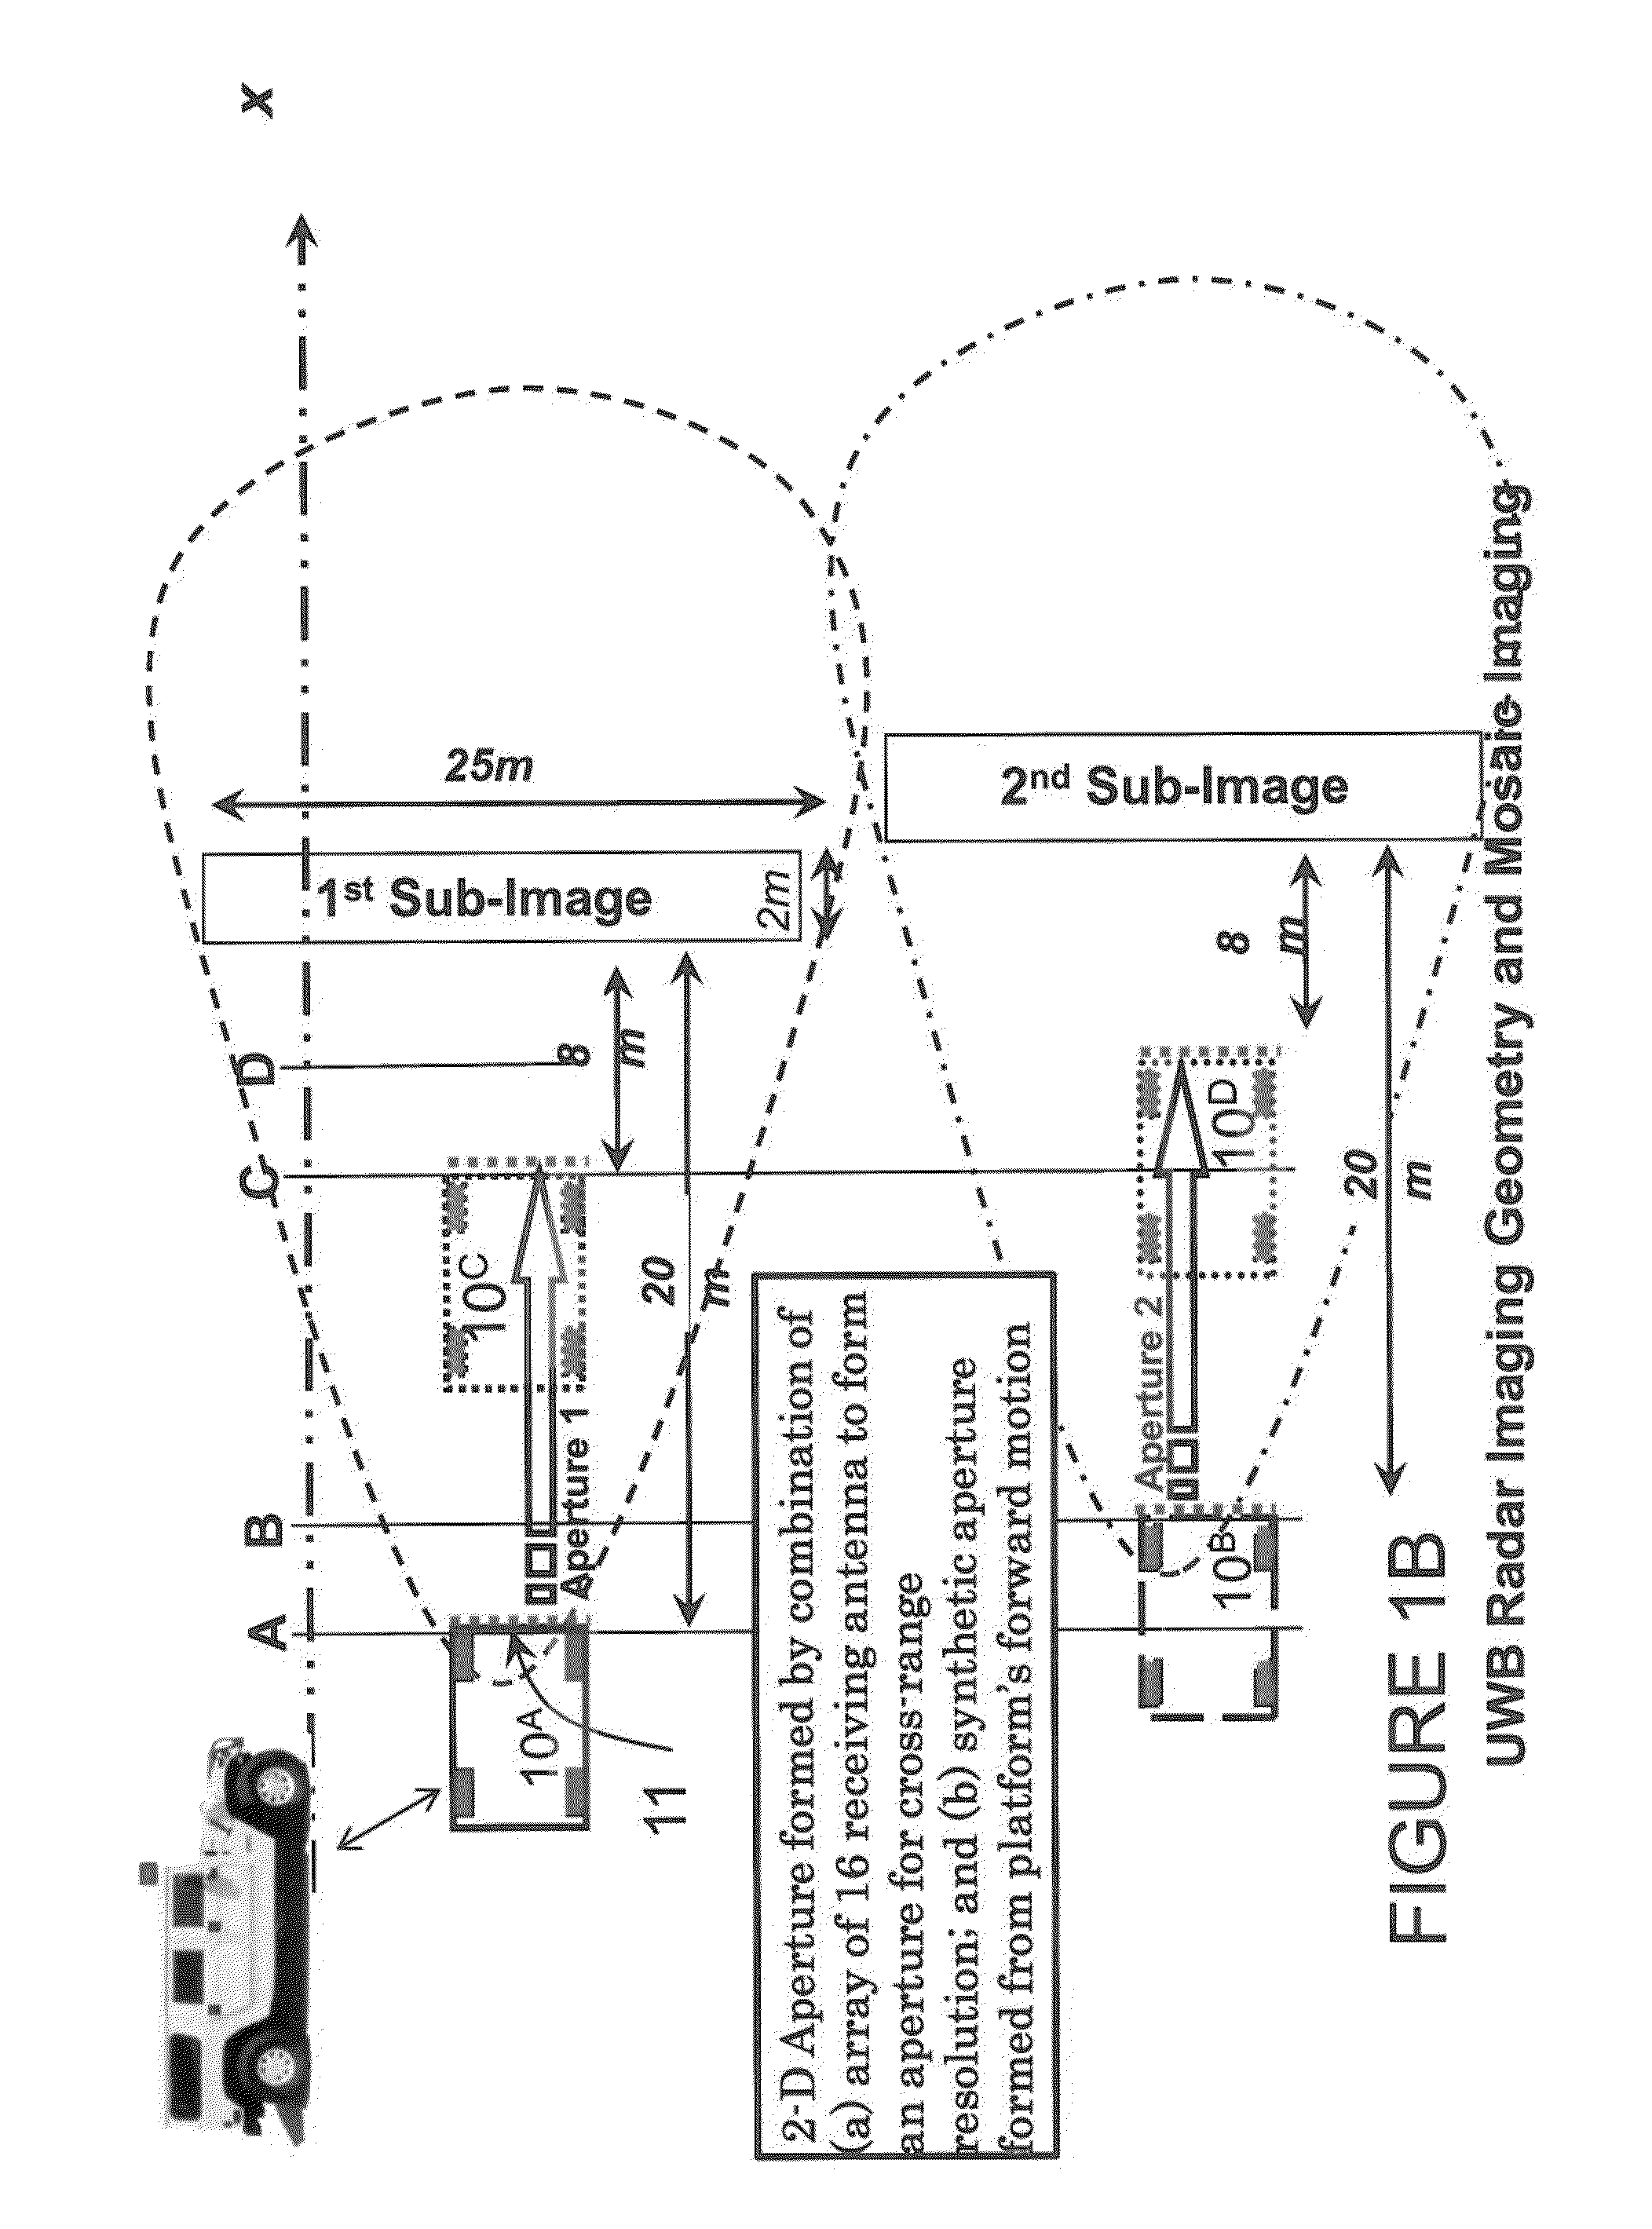 Apparatus and method for sampling and reconstruction of wide bandwidth signals below nyquist rate